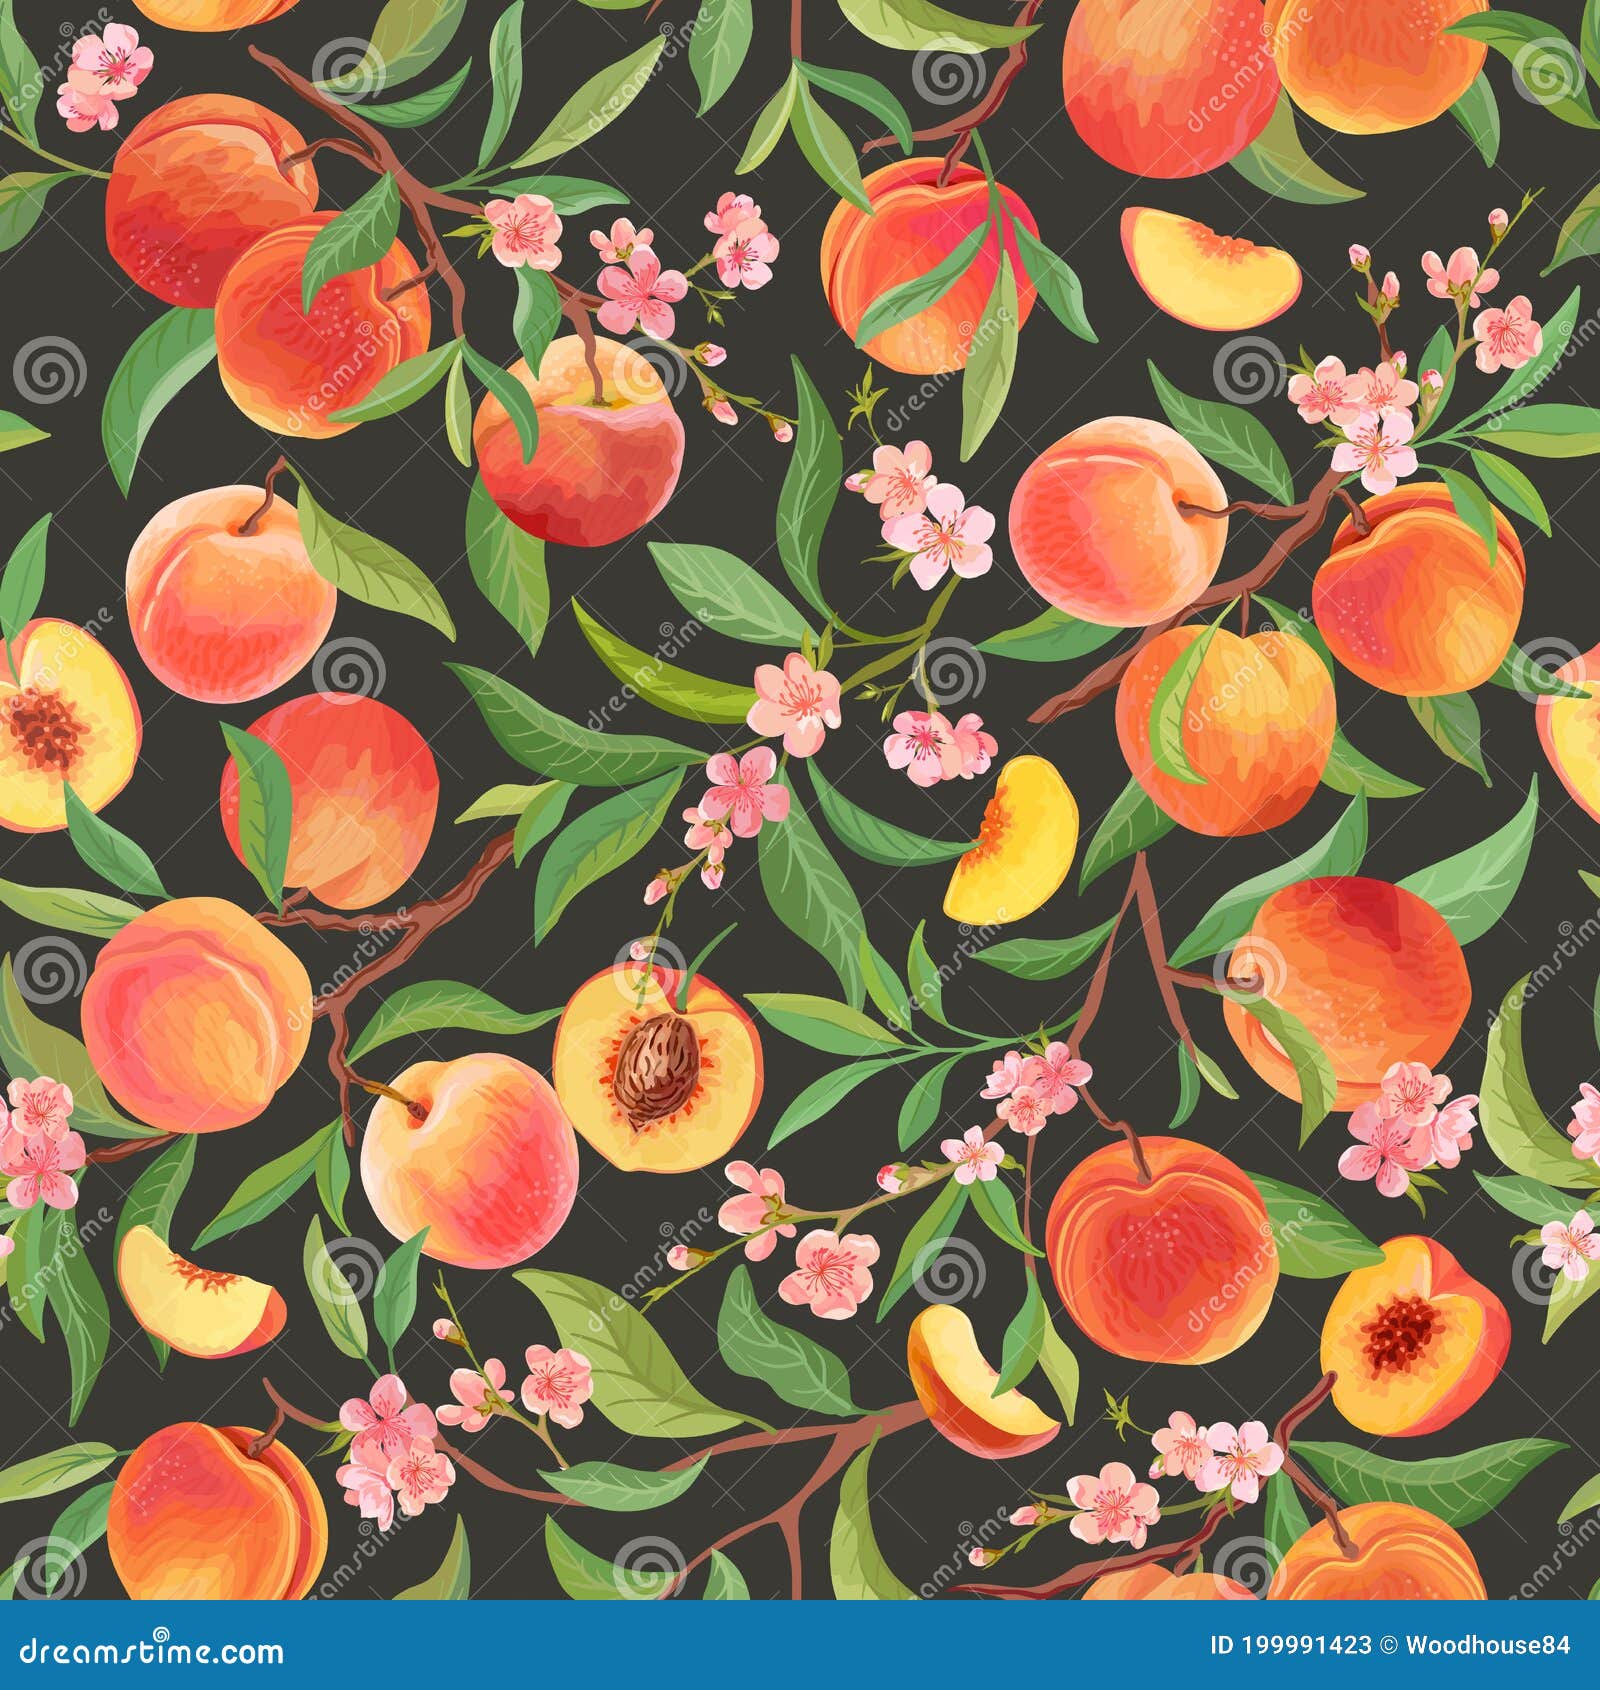 peach pattern with tropic fruits, leaves, flowers background. seamless texture  in watercolor style